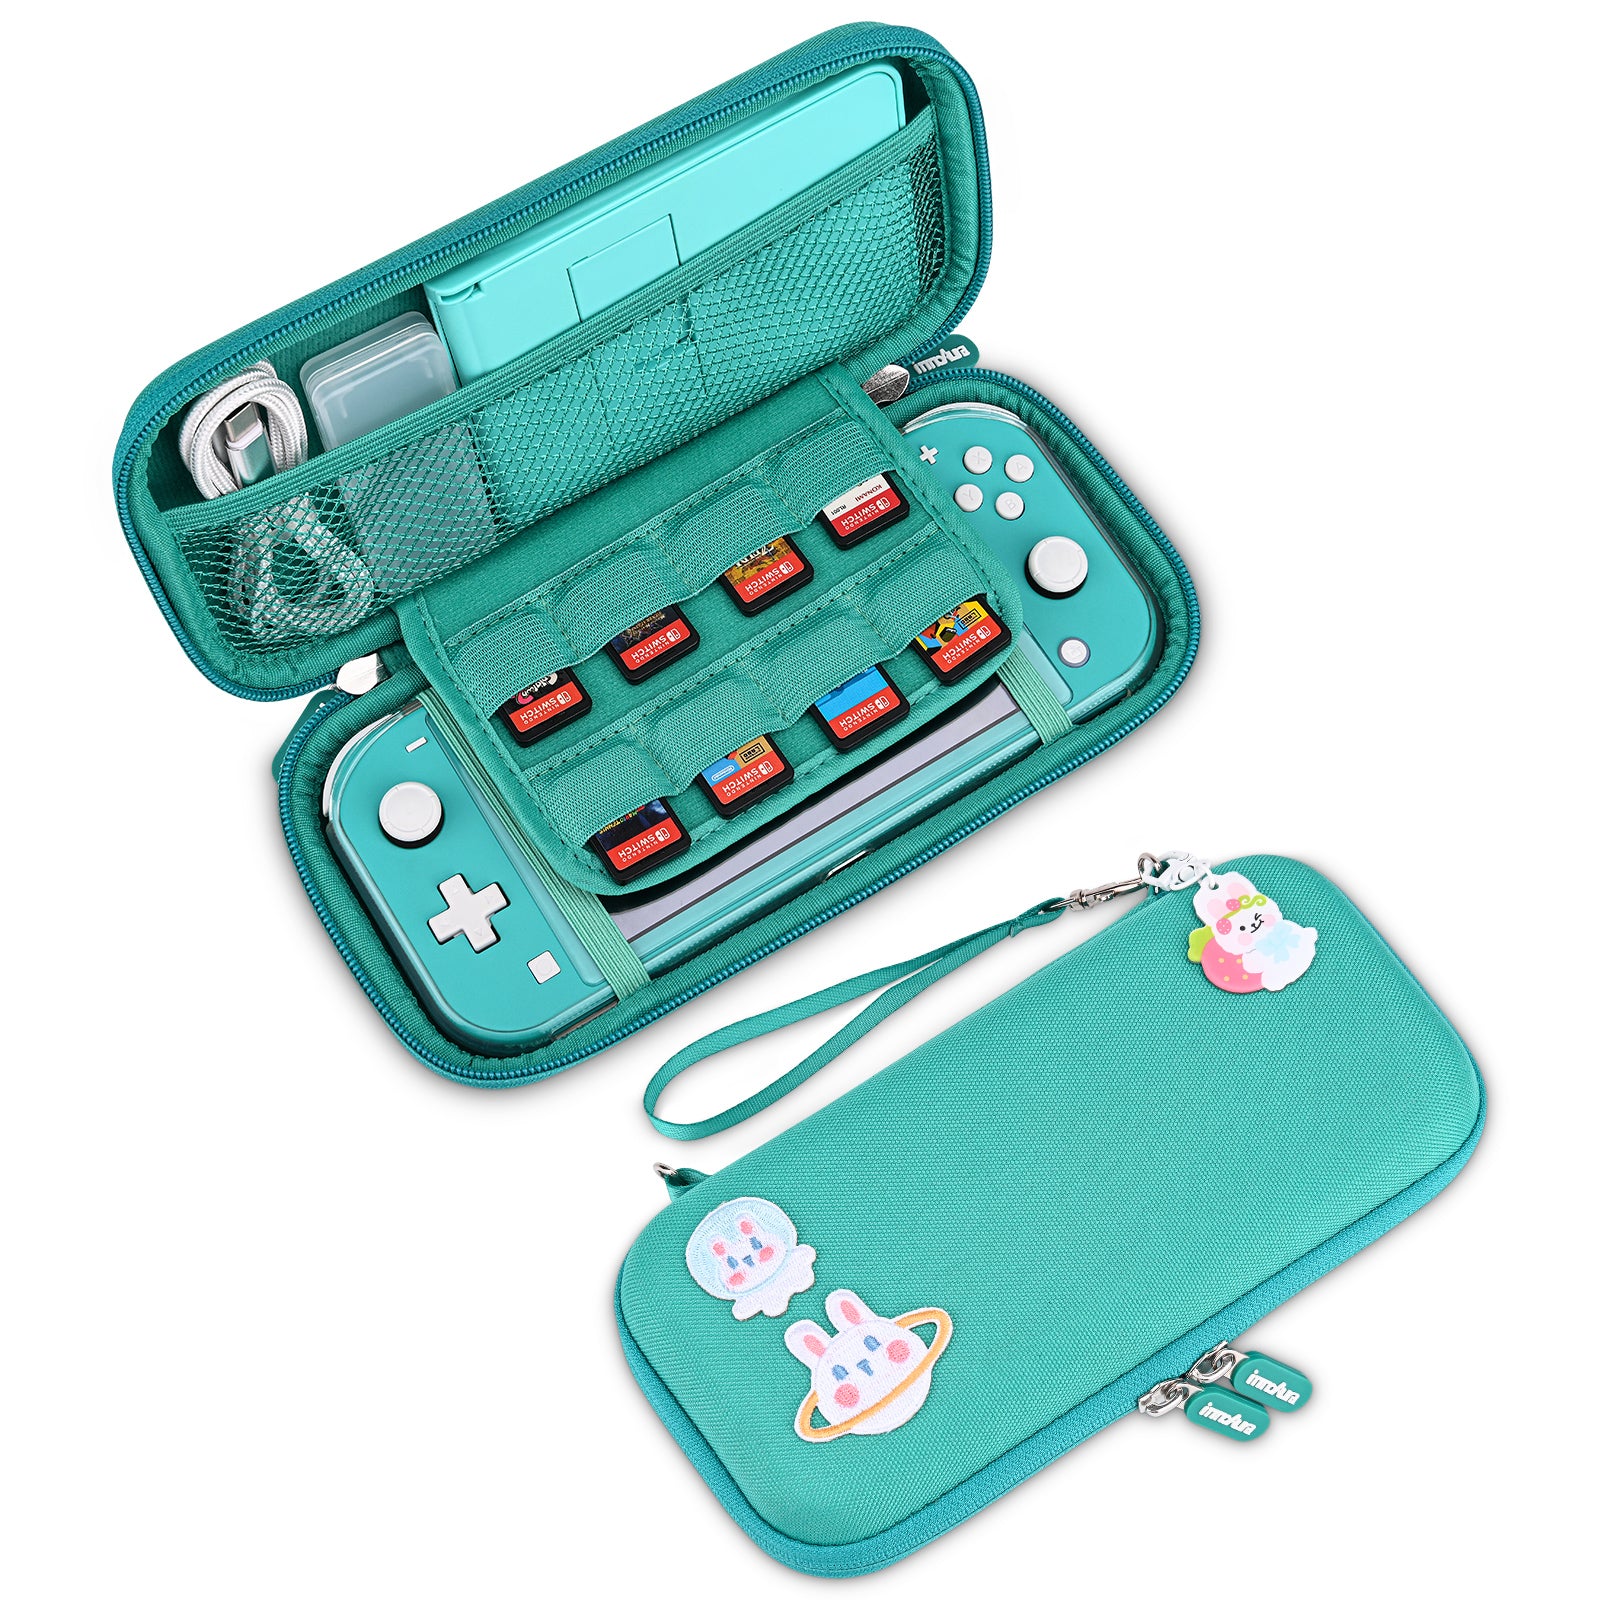 innoAura Nintendo Switch Lite Carrying Case, Lite Thumb Grips